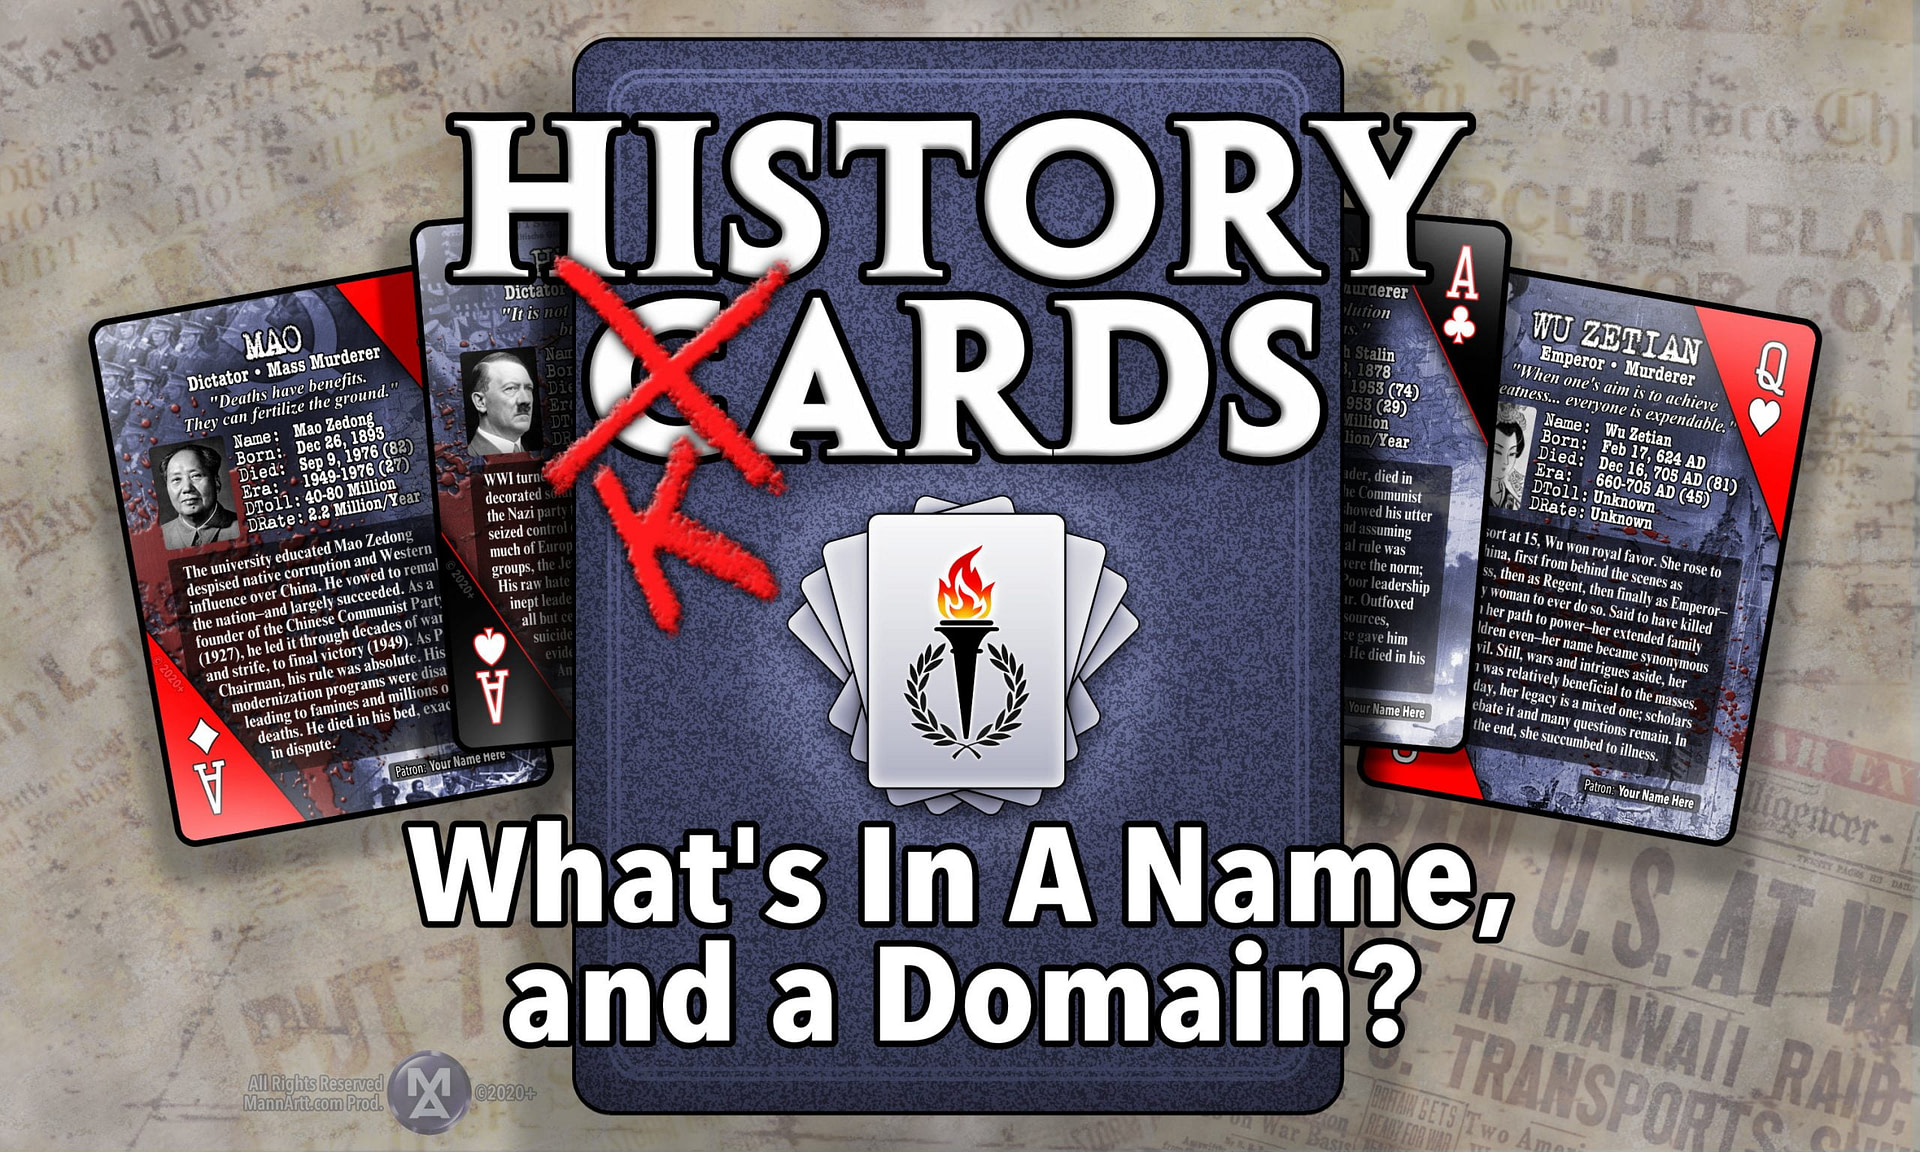 WHEN HISTORY CARDS BECAME HISTORY KARDS 1